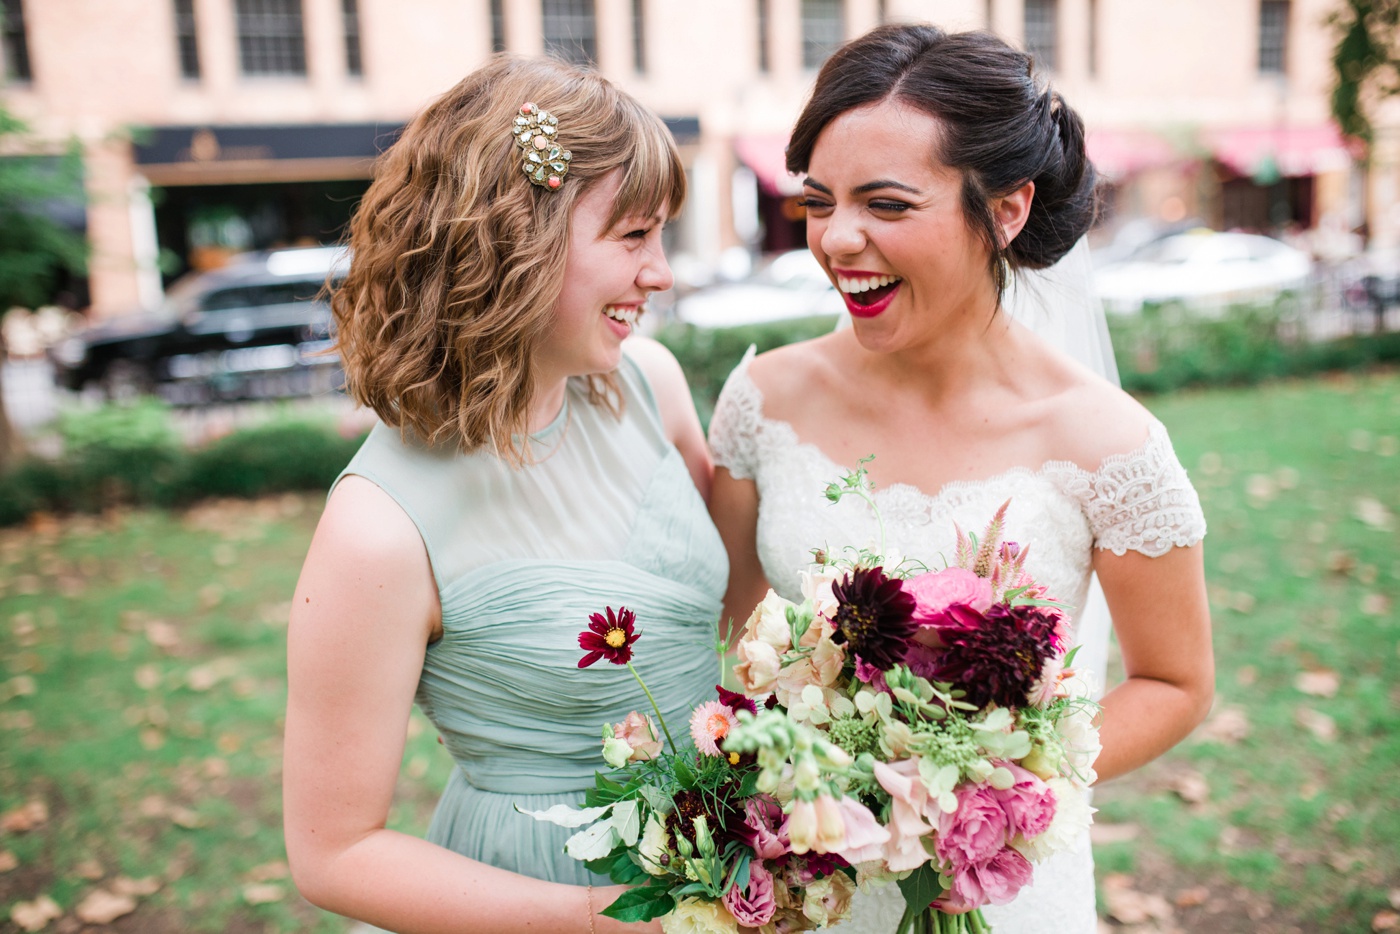 J Crew Dusty Shale Bridesmaid Dresses - Chicory Florals - Alison Dunn Photography photo